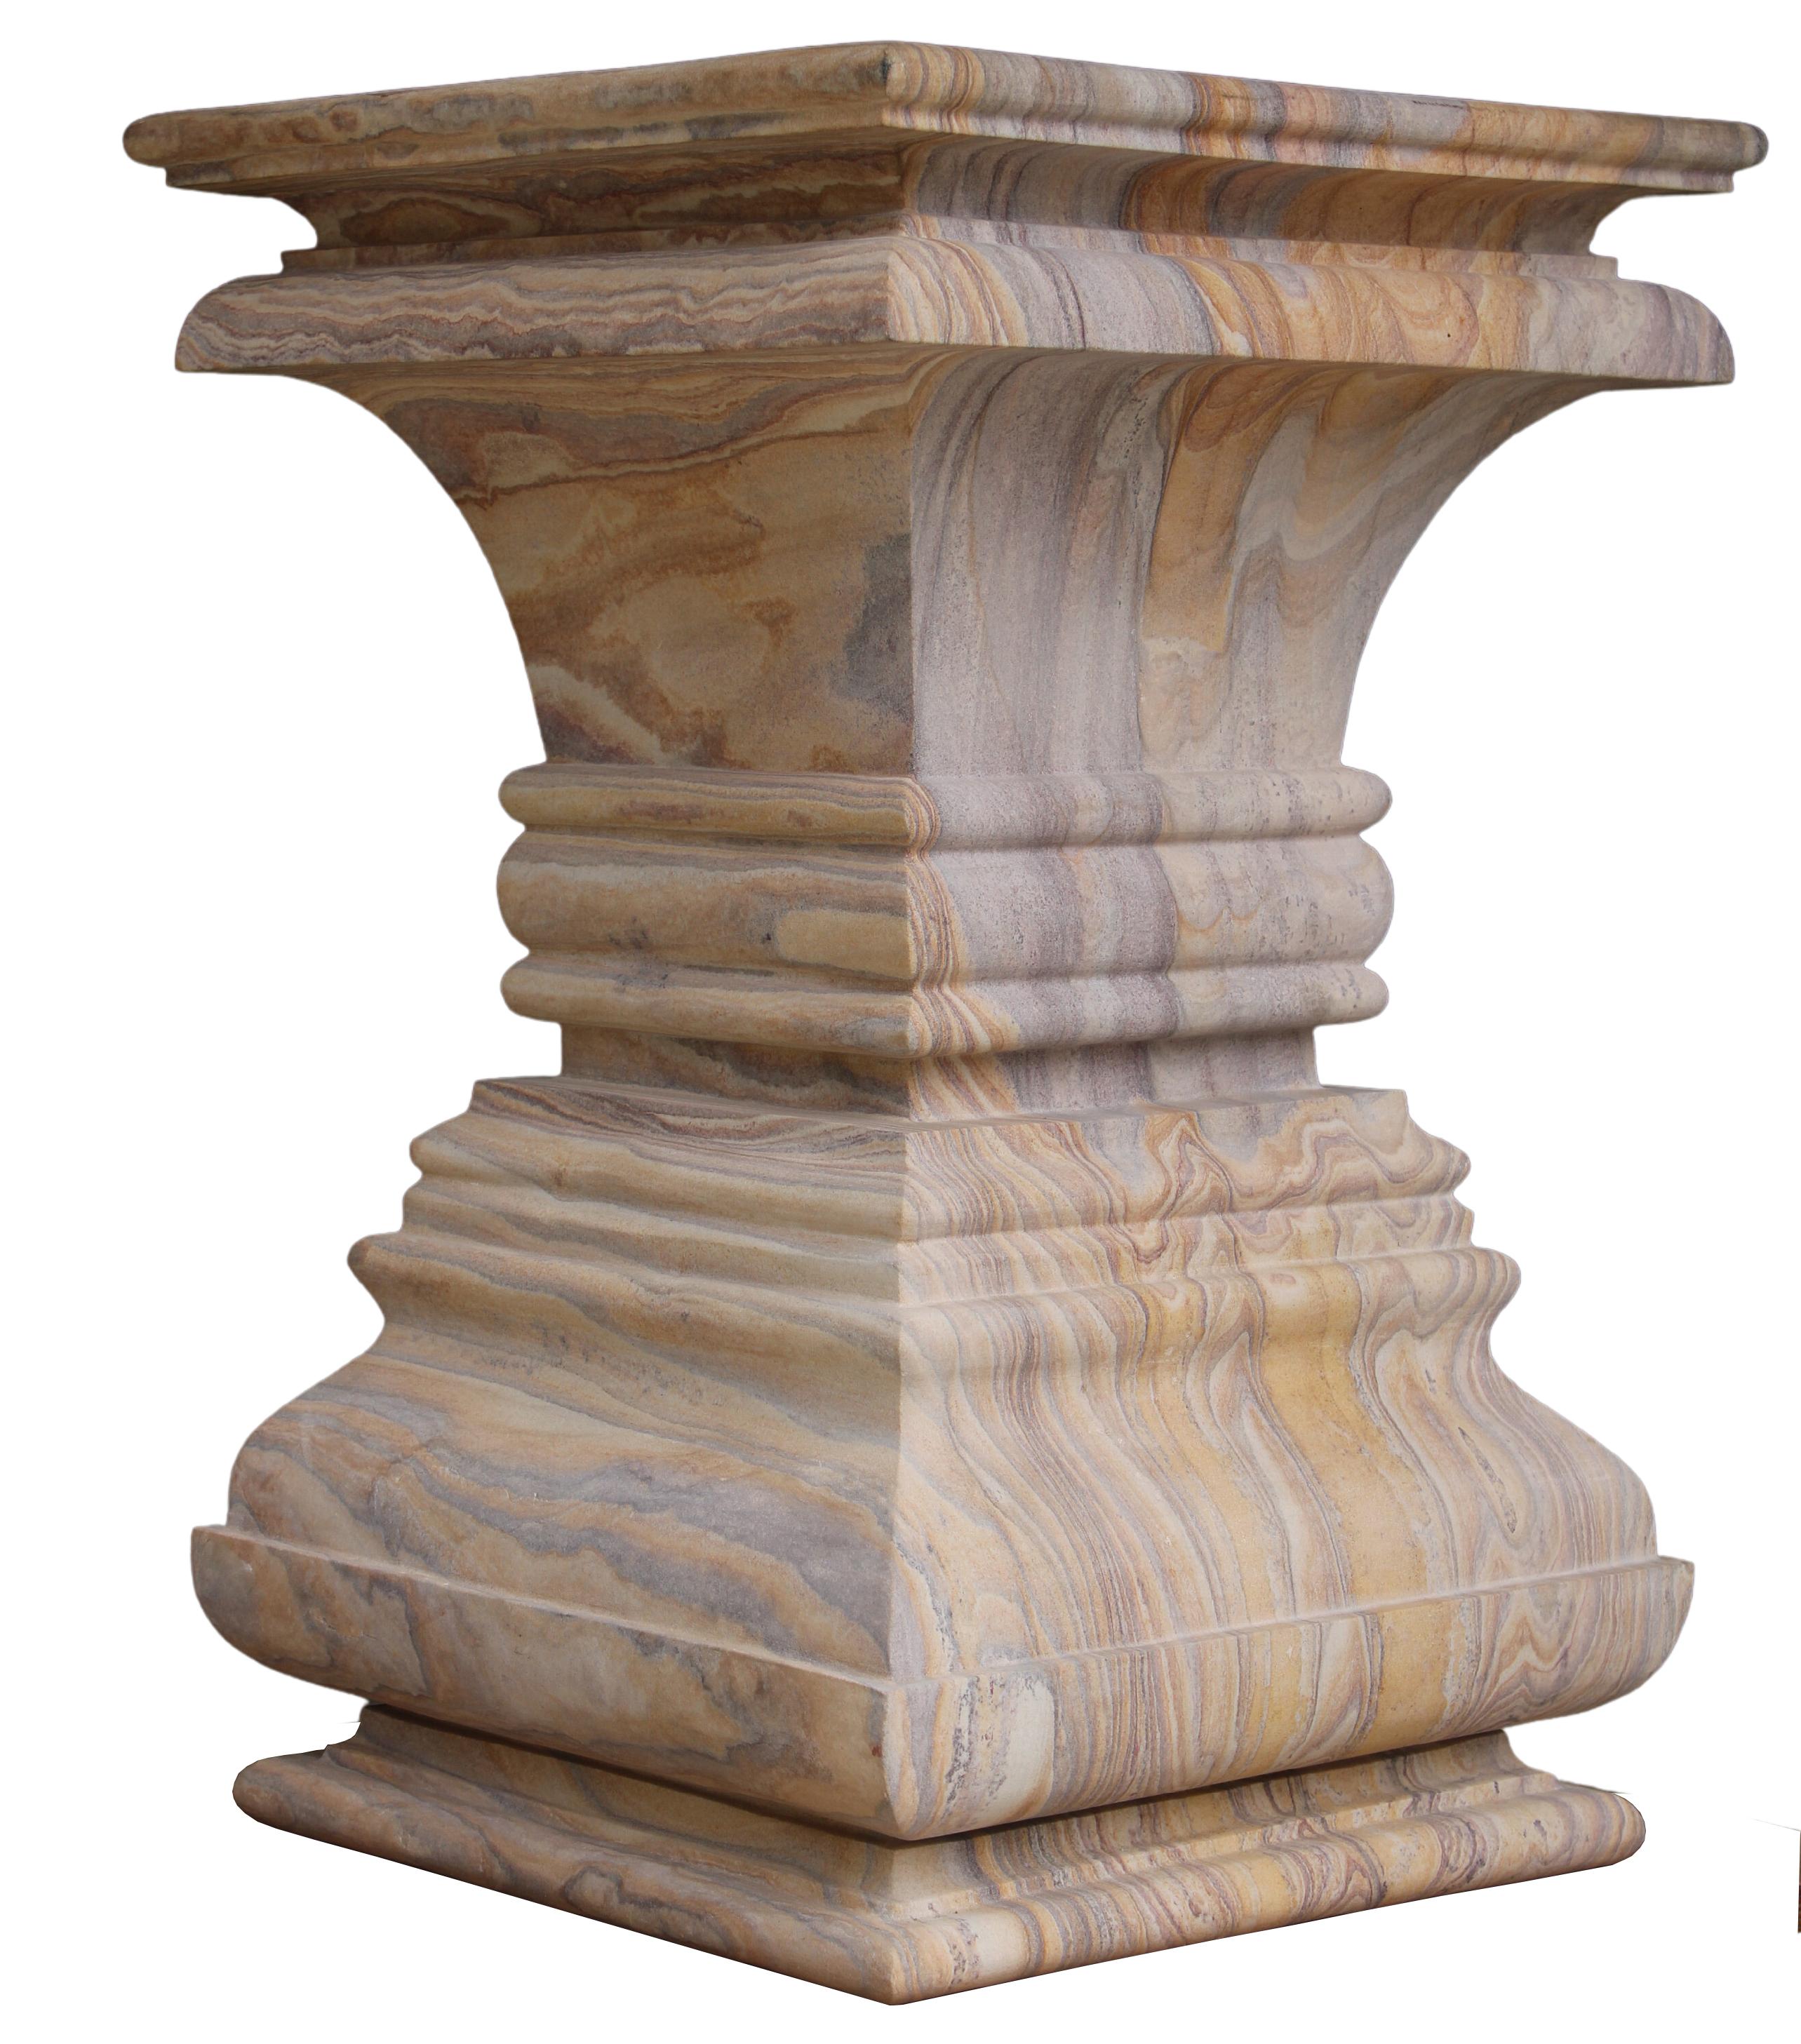 Modern Square Architectural Pedestal Side Table in Rainbow Teakwood Stone In New Condition For Sale In New York, NY